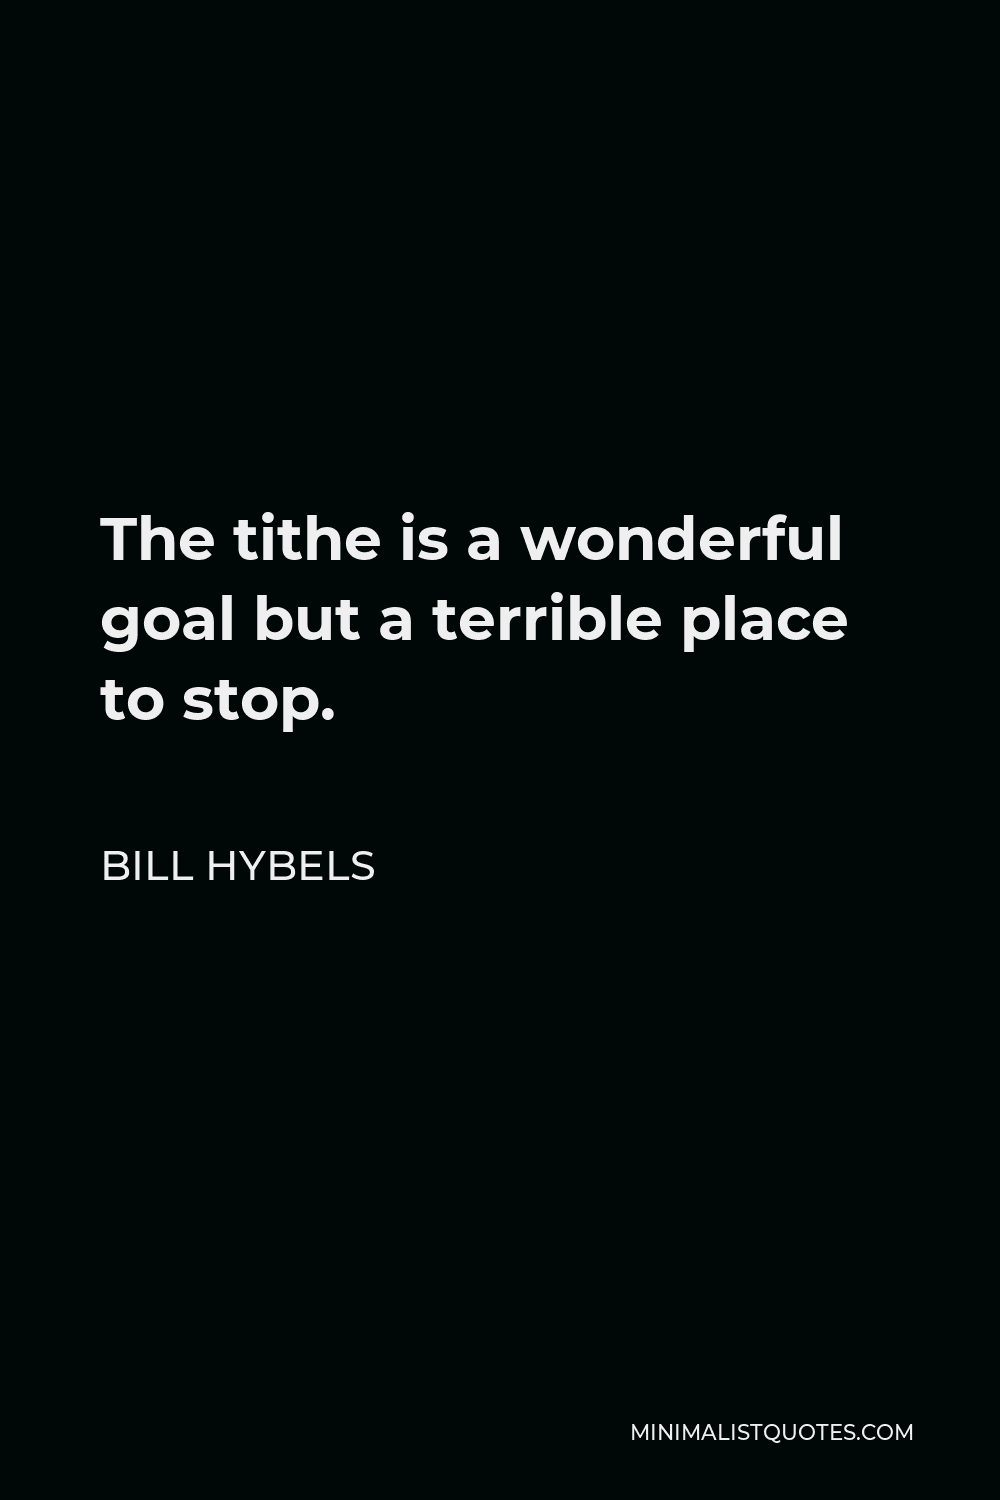 Bill Hybels Quote - The tithe is a wonderful goal but a terrible place to stop.